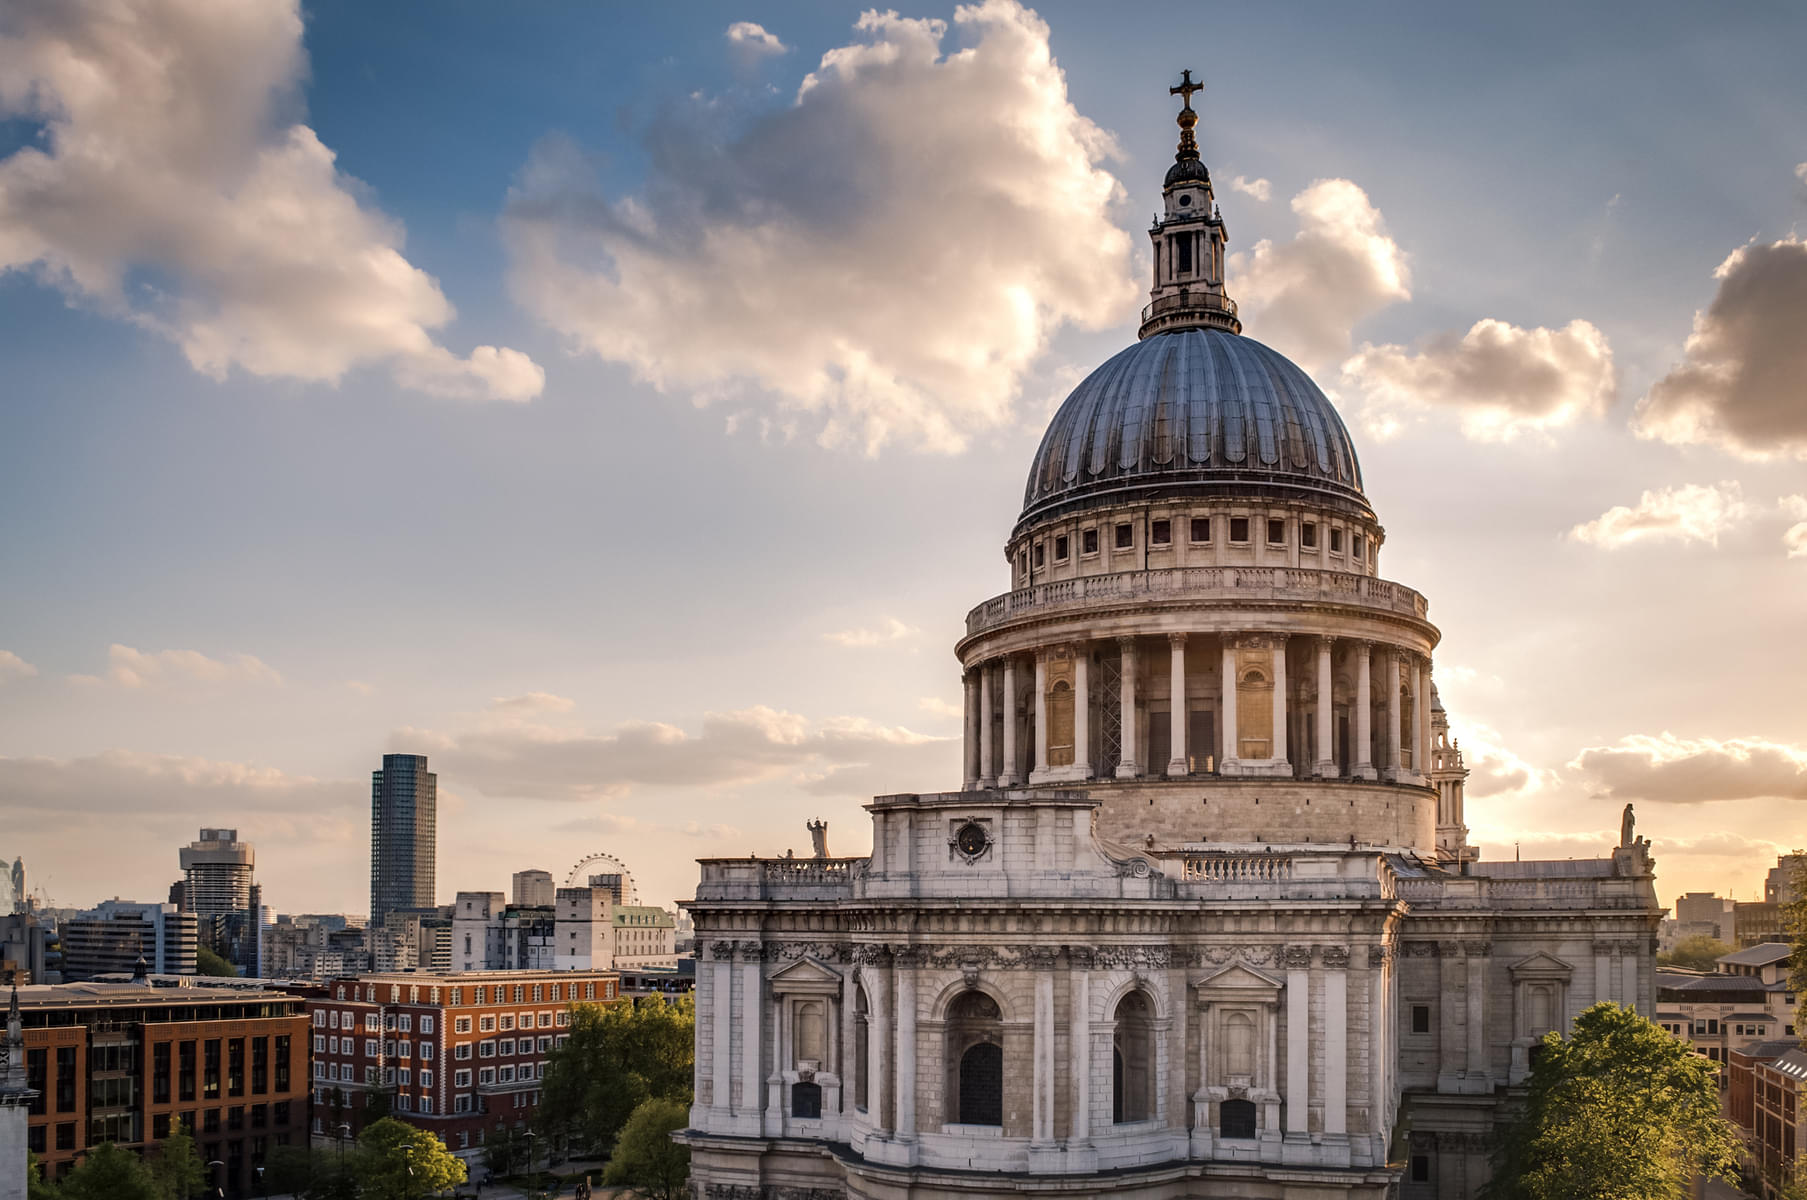 Marvel at the majestic St Paul’s Cathedral